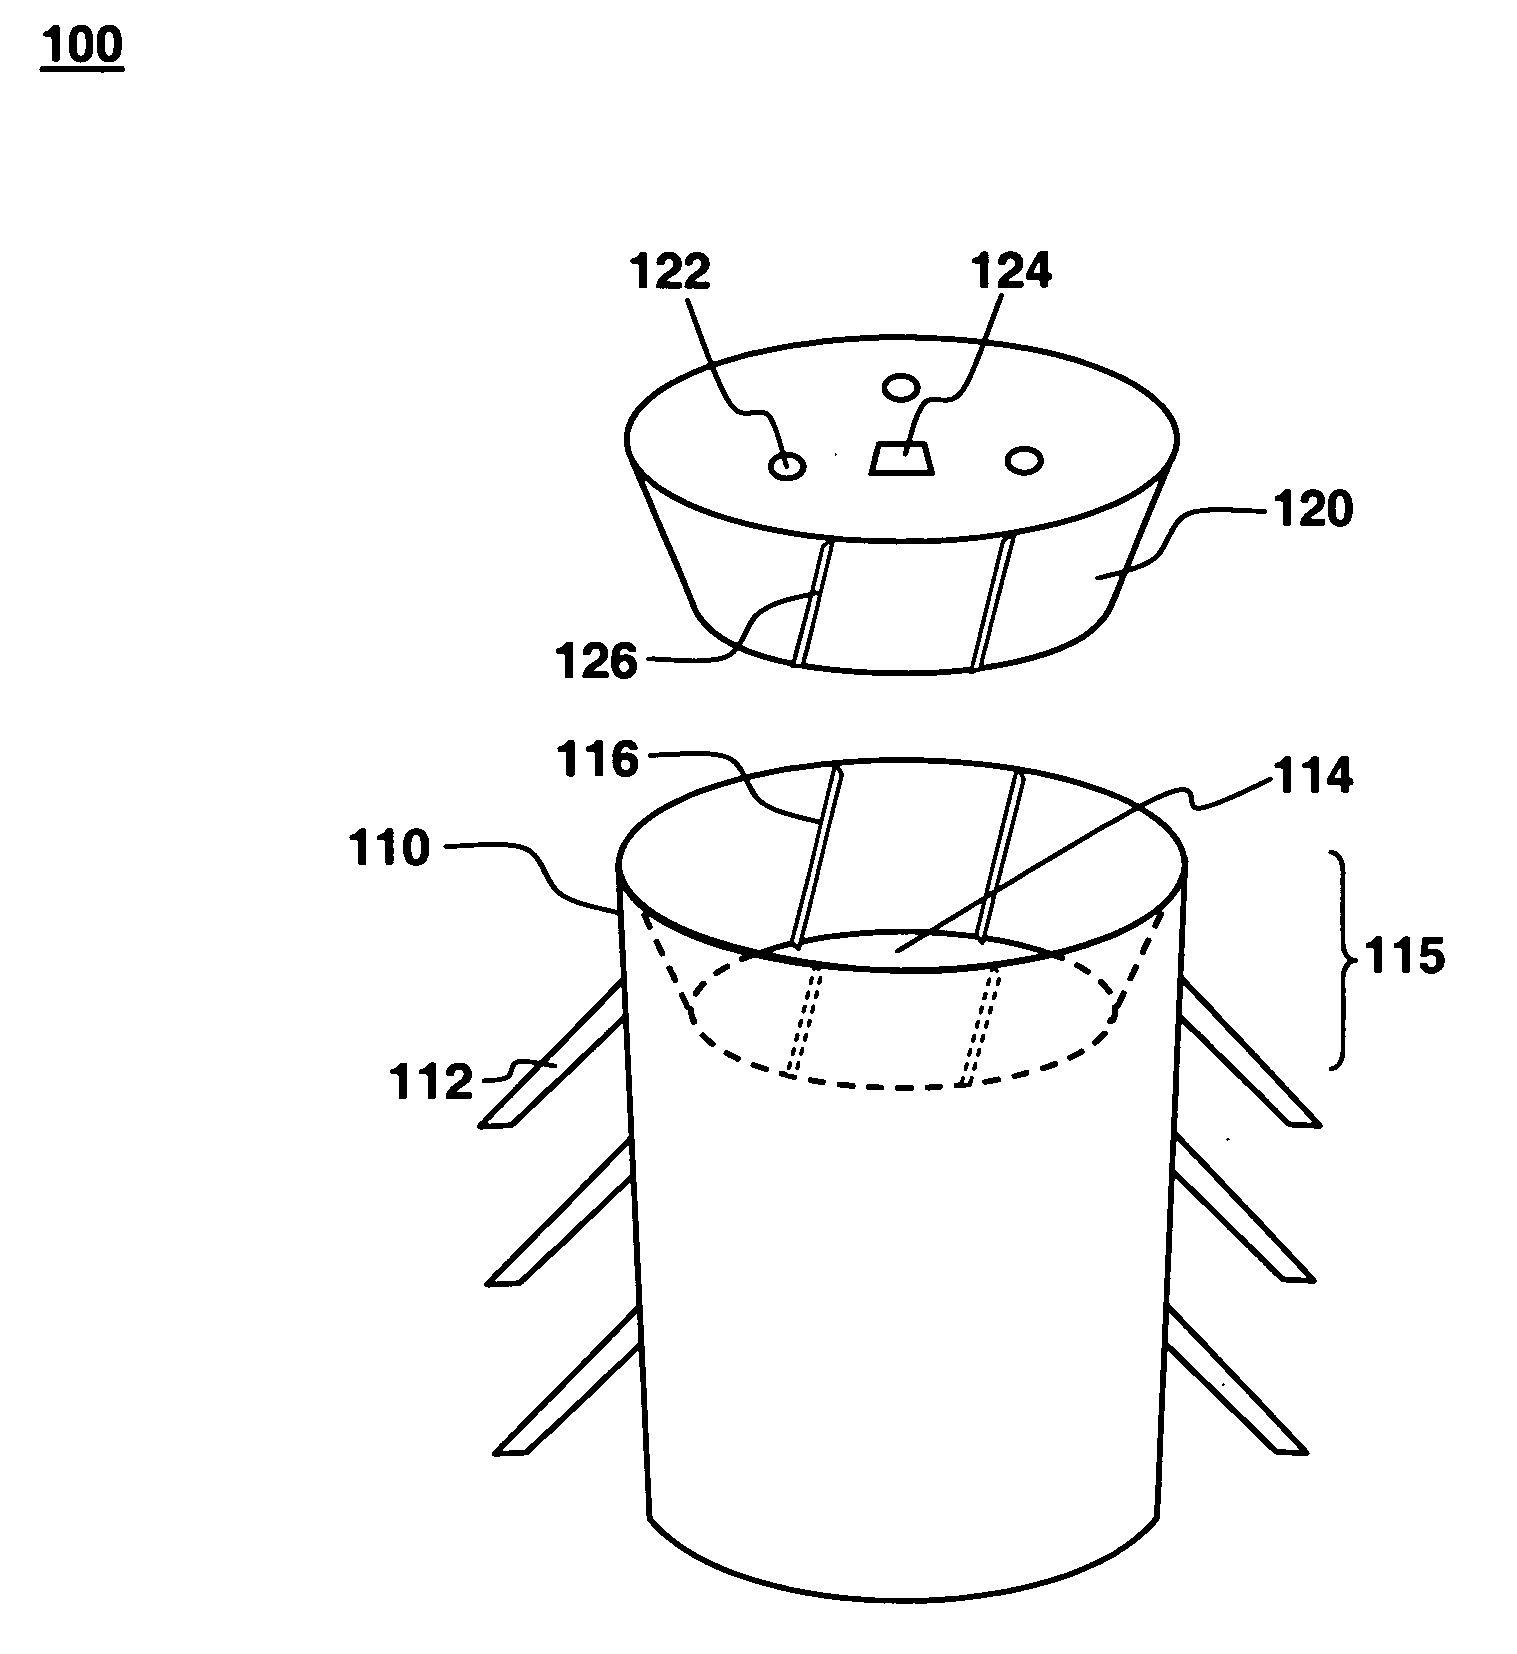 Multifilament anchor for reducing a compass of a lumen or structure in mammalian body